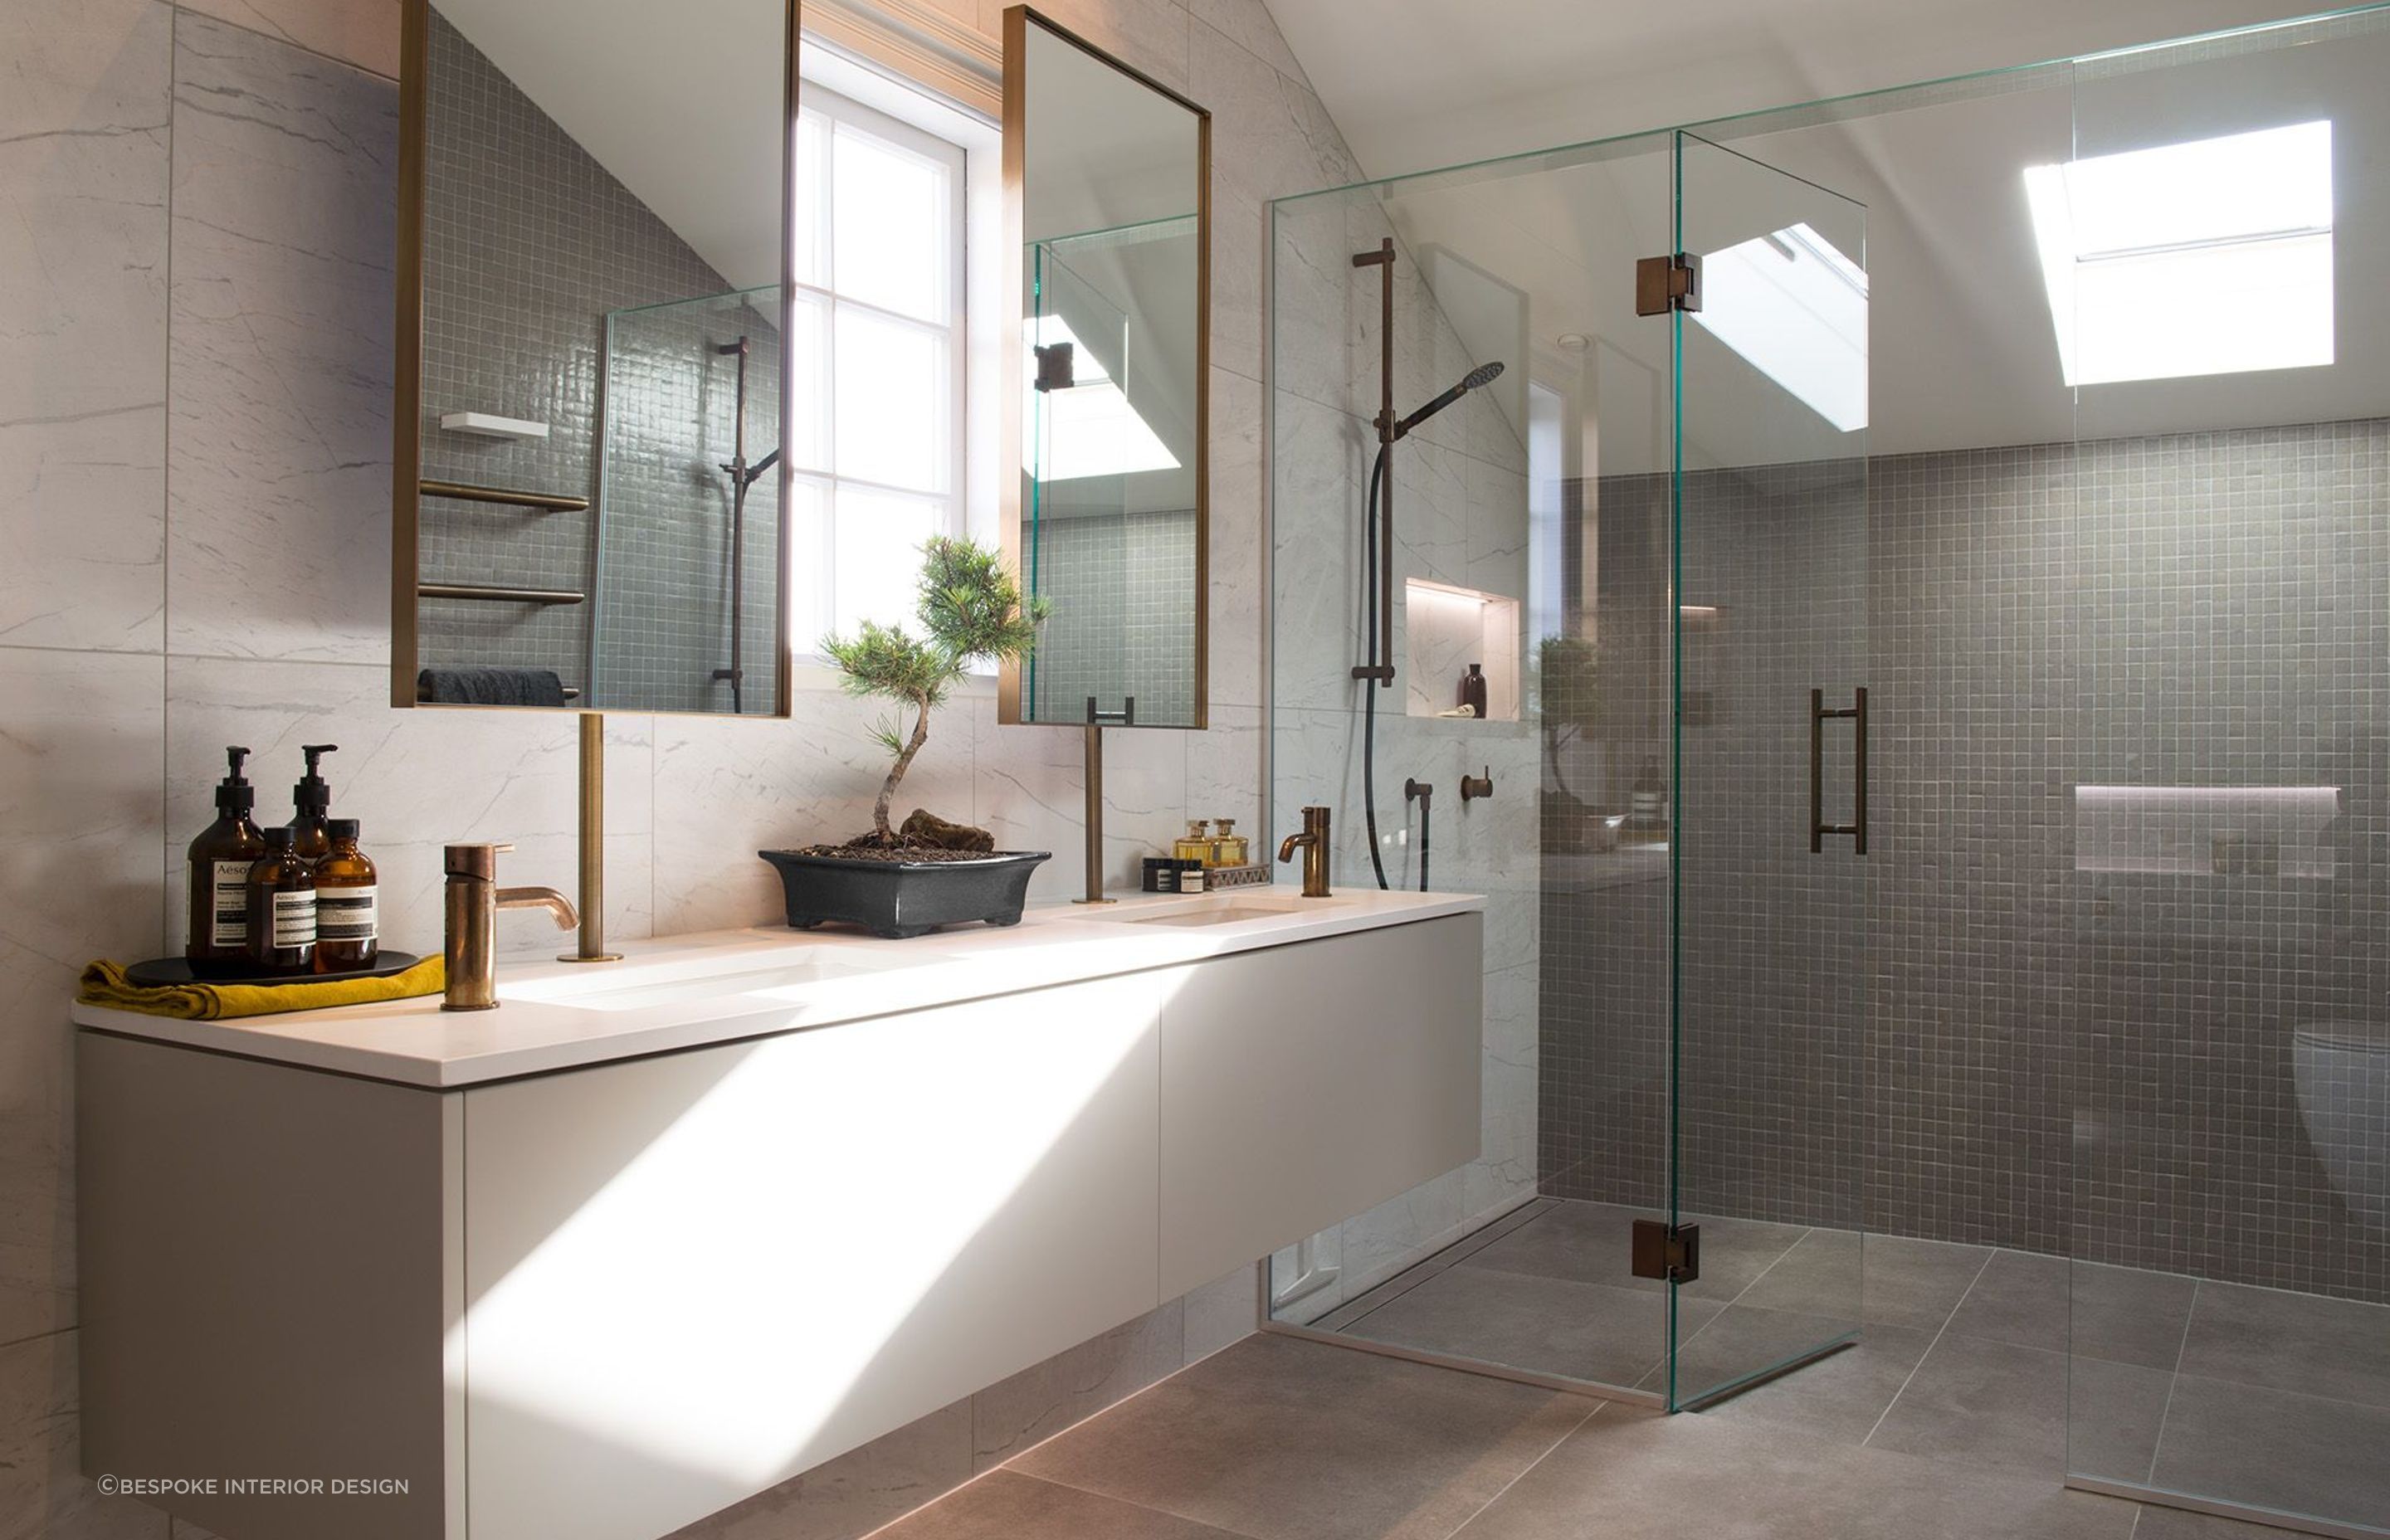 It's hard to beat the look and feel of a high-quality bathroom renovation as seen here at Rangitoto House in Remuera